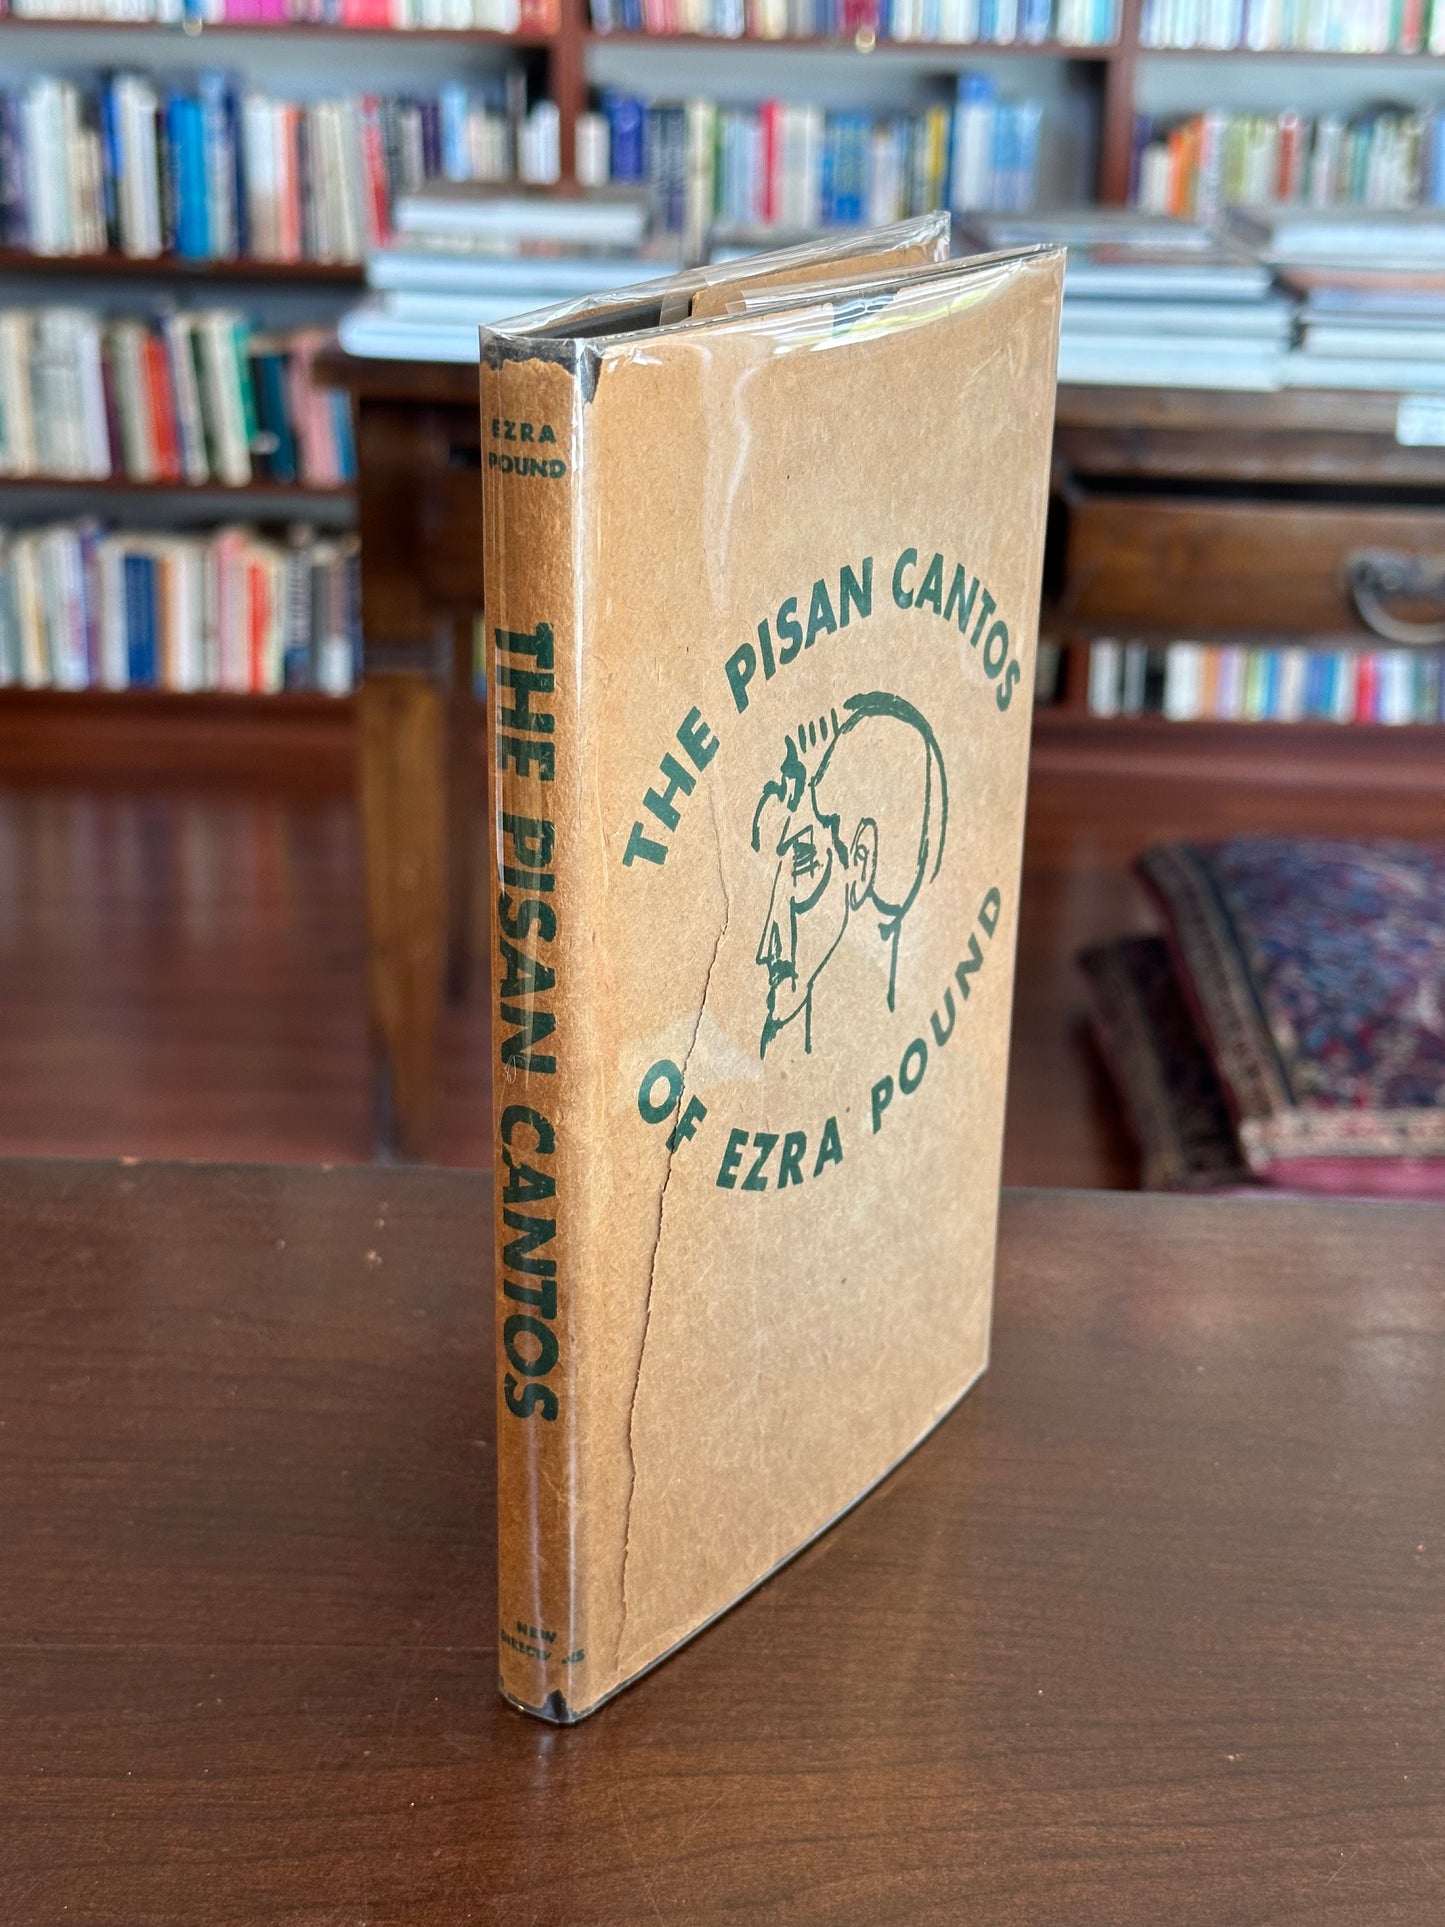 The Pisan Cantos by Ezra Pound (First Edition)